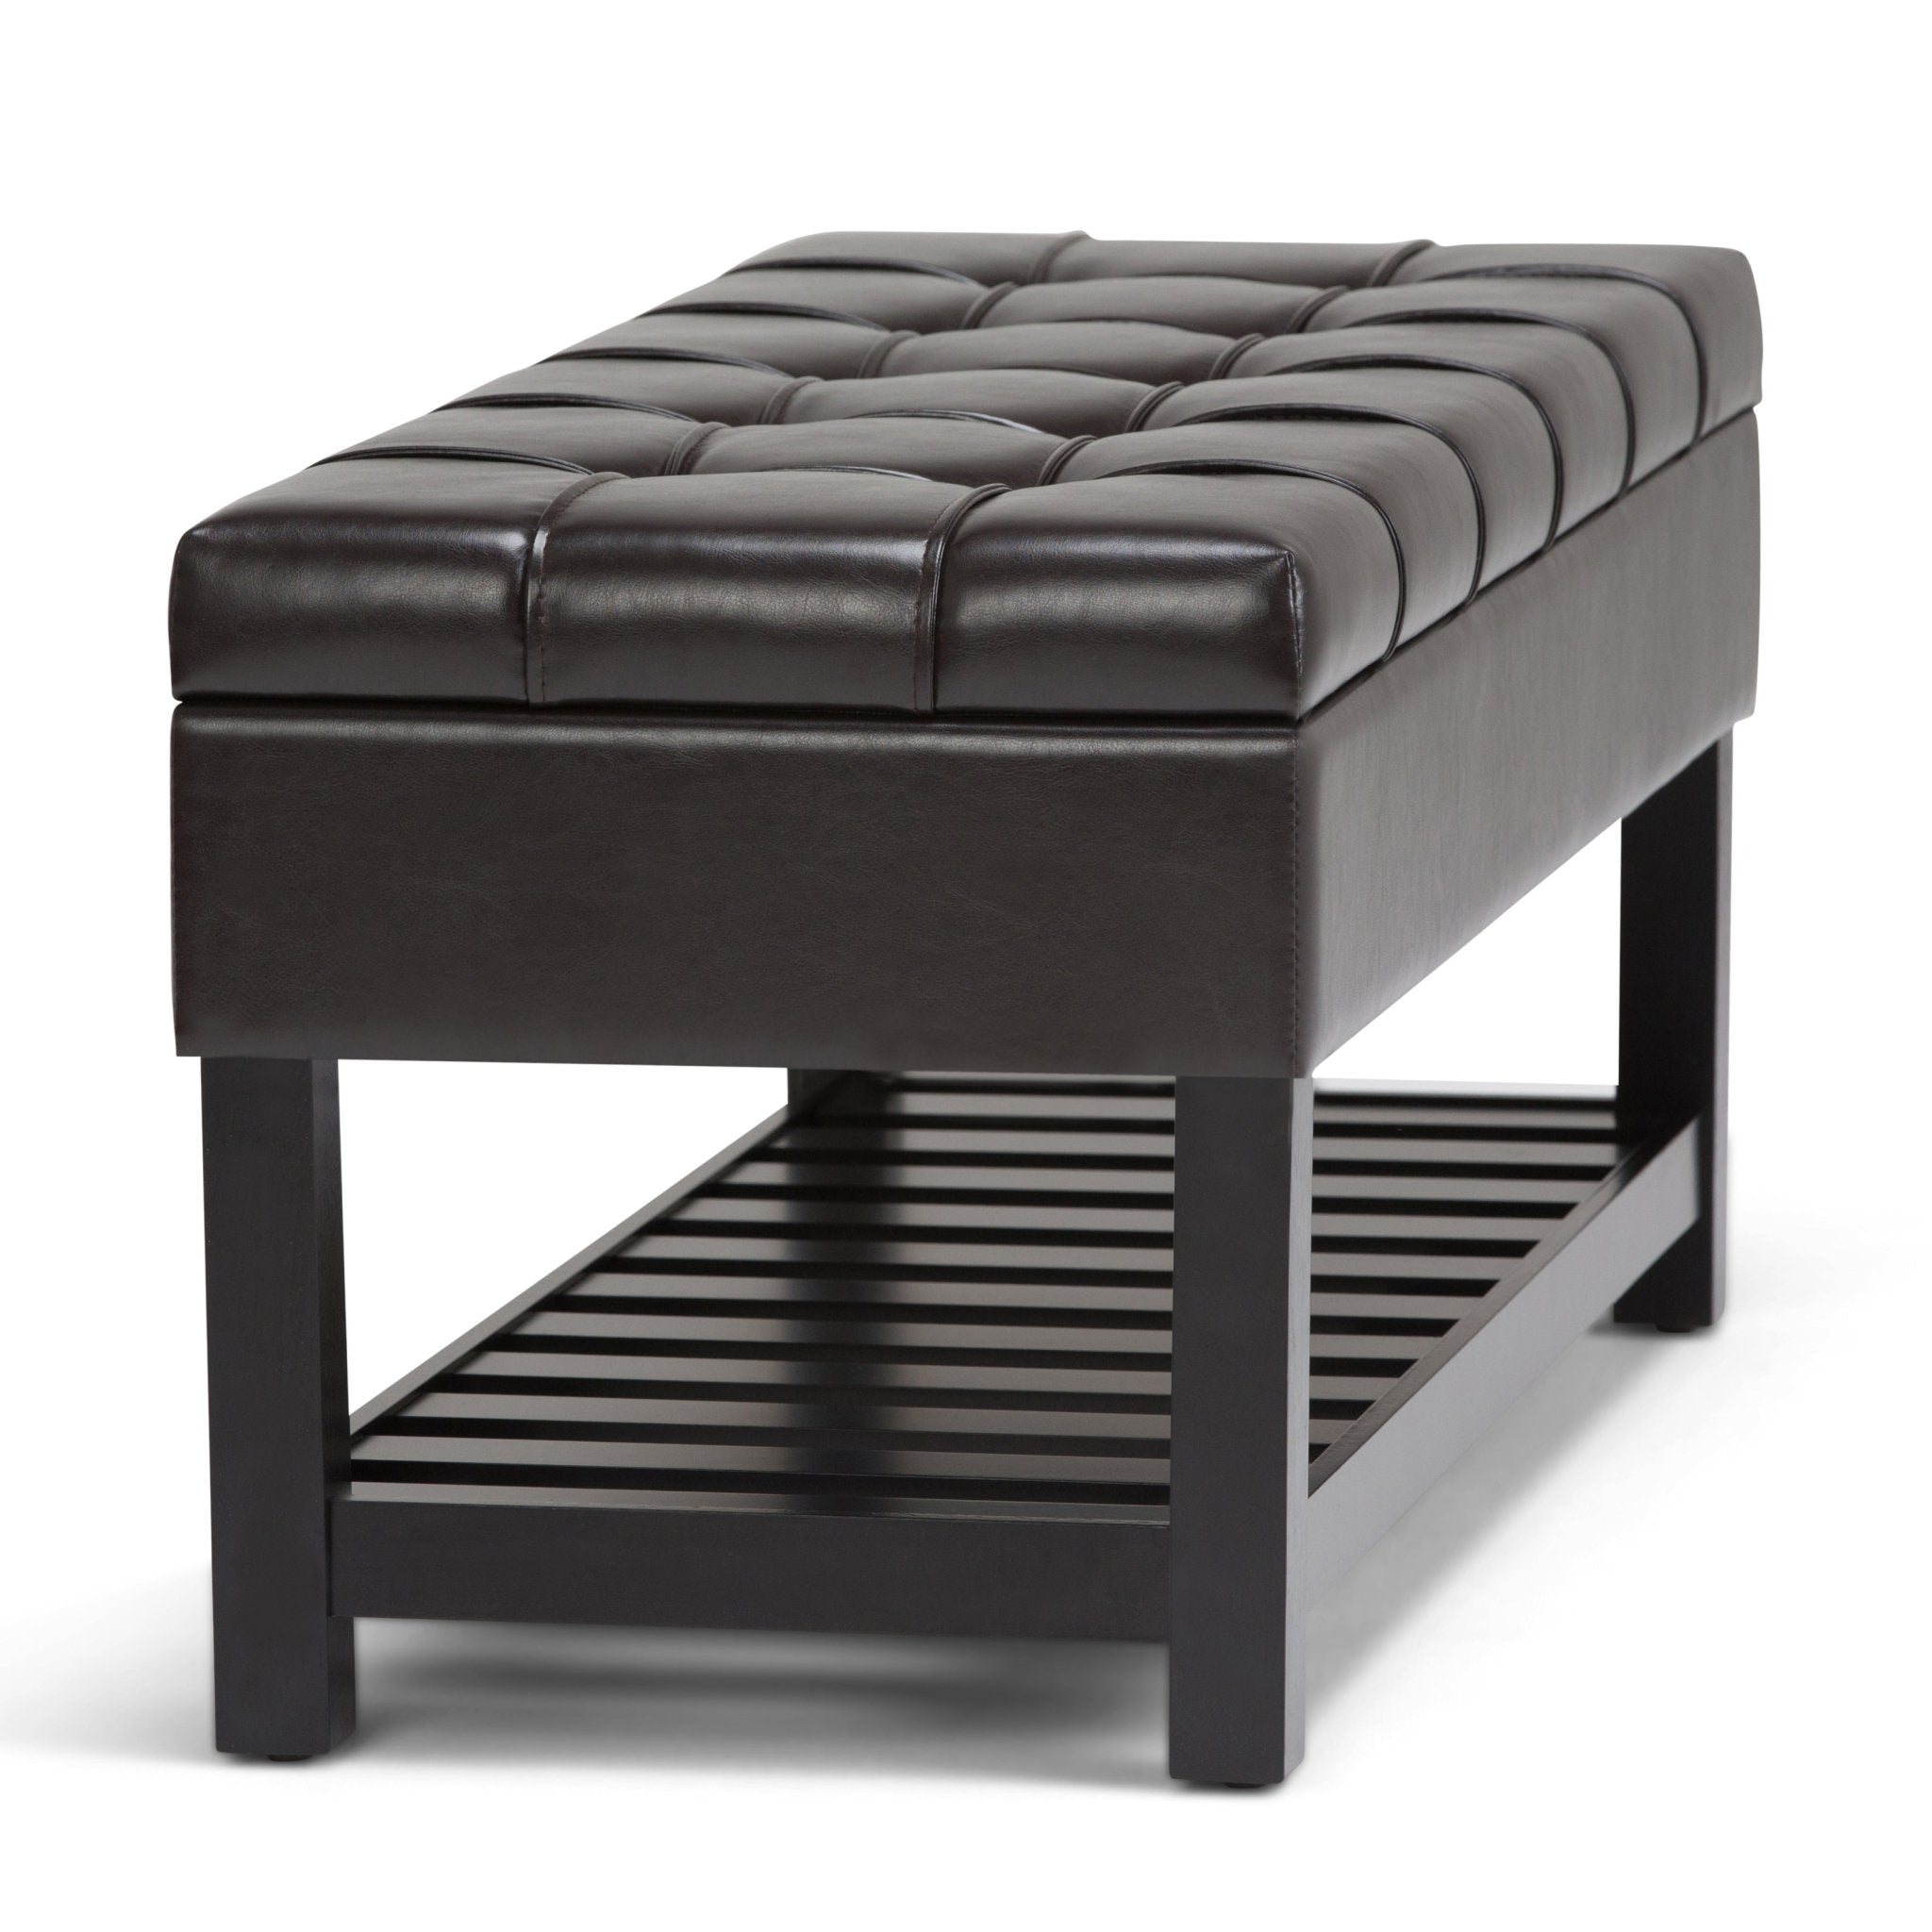 Novaesque Upholstered Storage Bench with Stitched Tufted Top and Open Slat Bottom Shelf - Benches